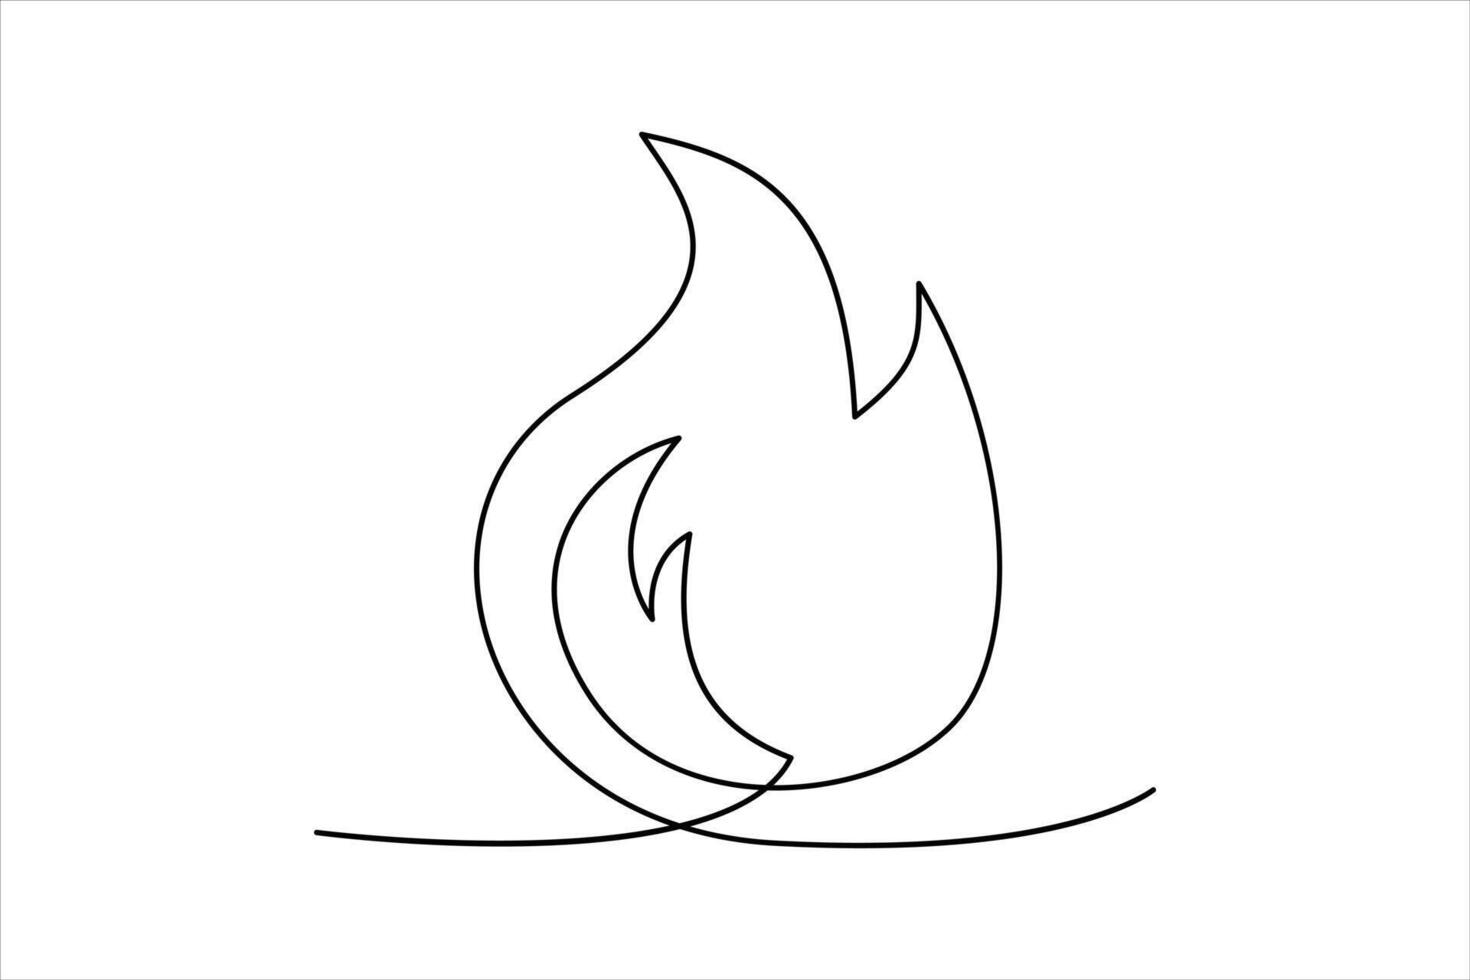 Continuous one line drawing fire art illustration of white background vector